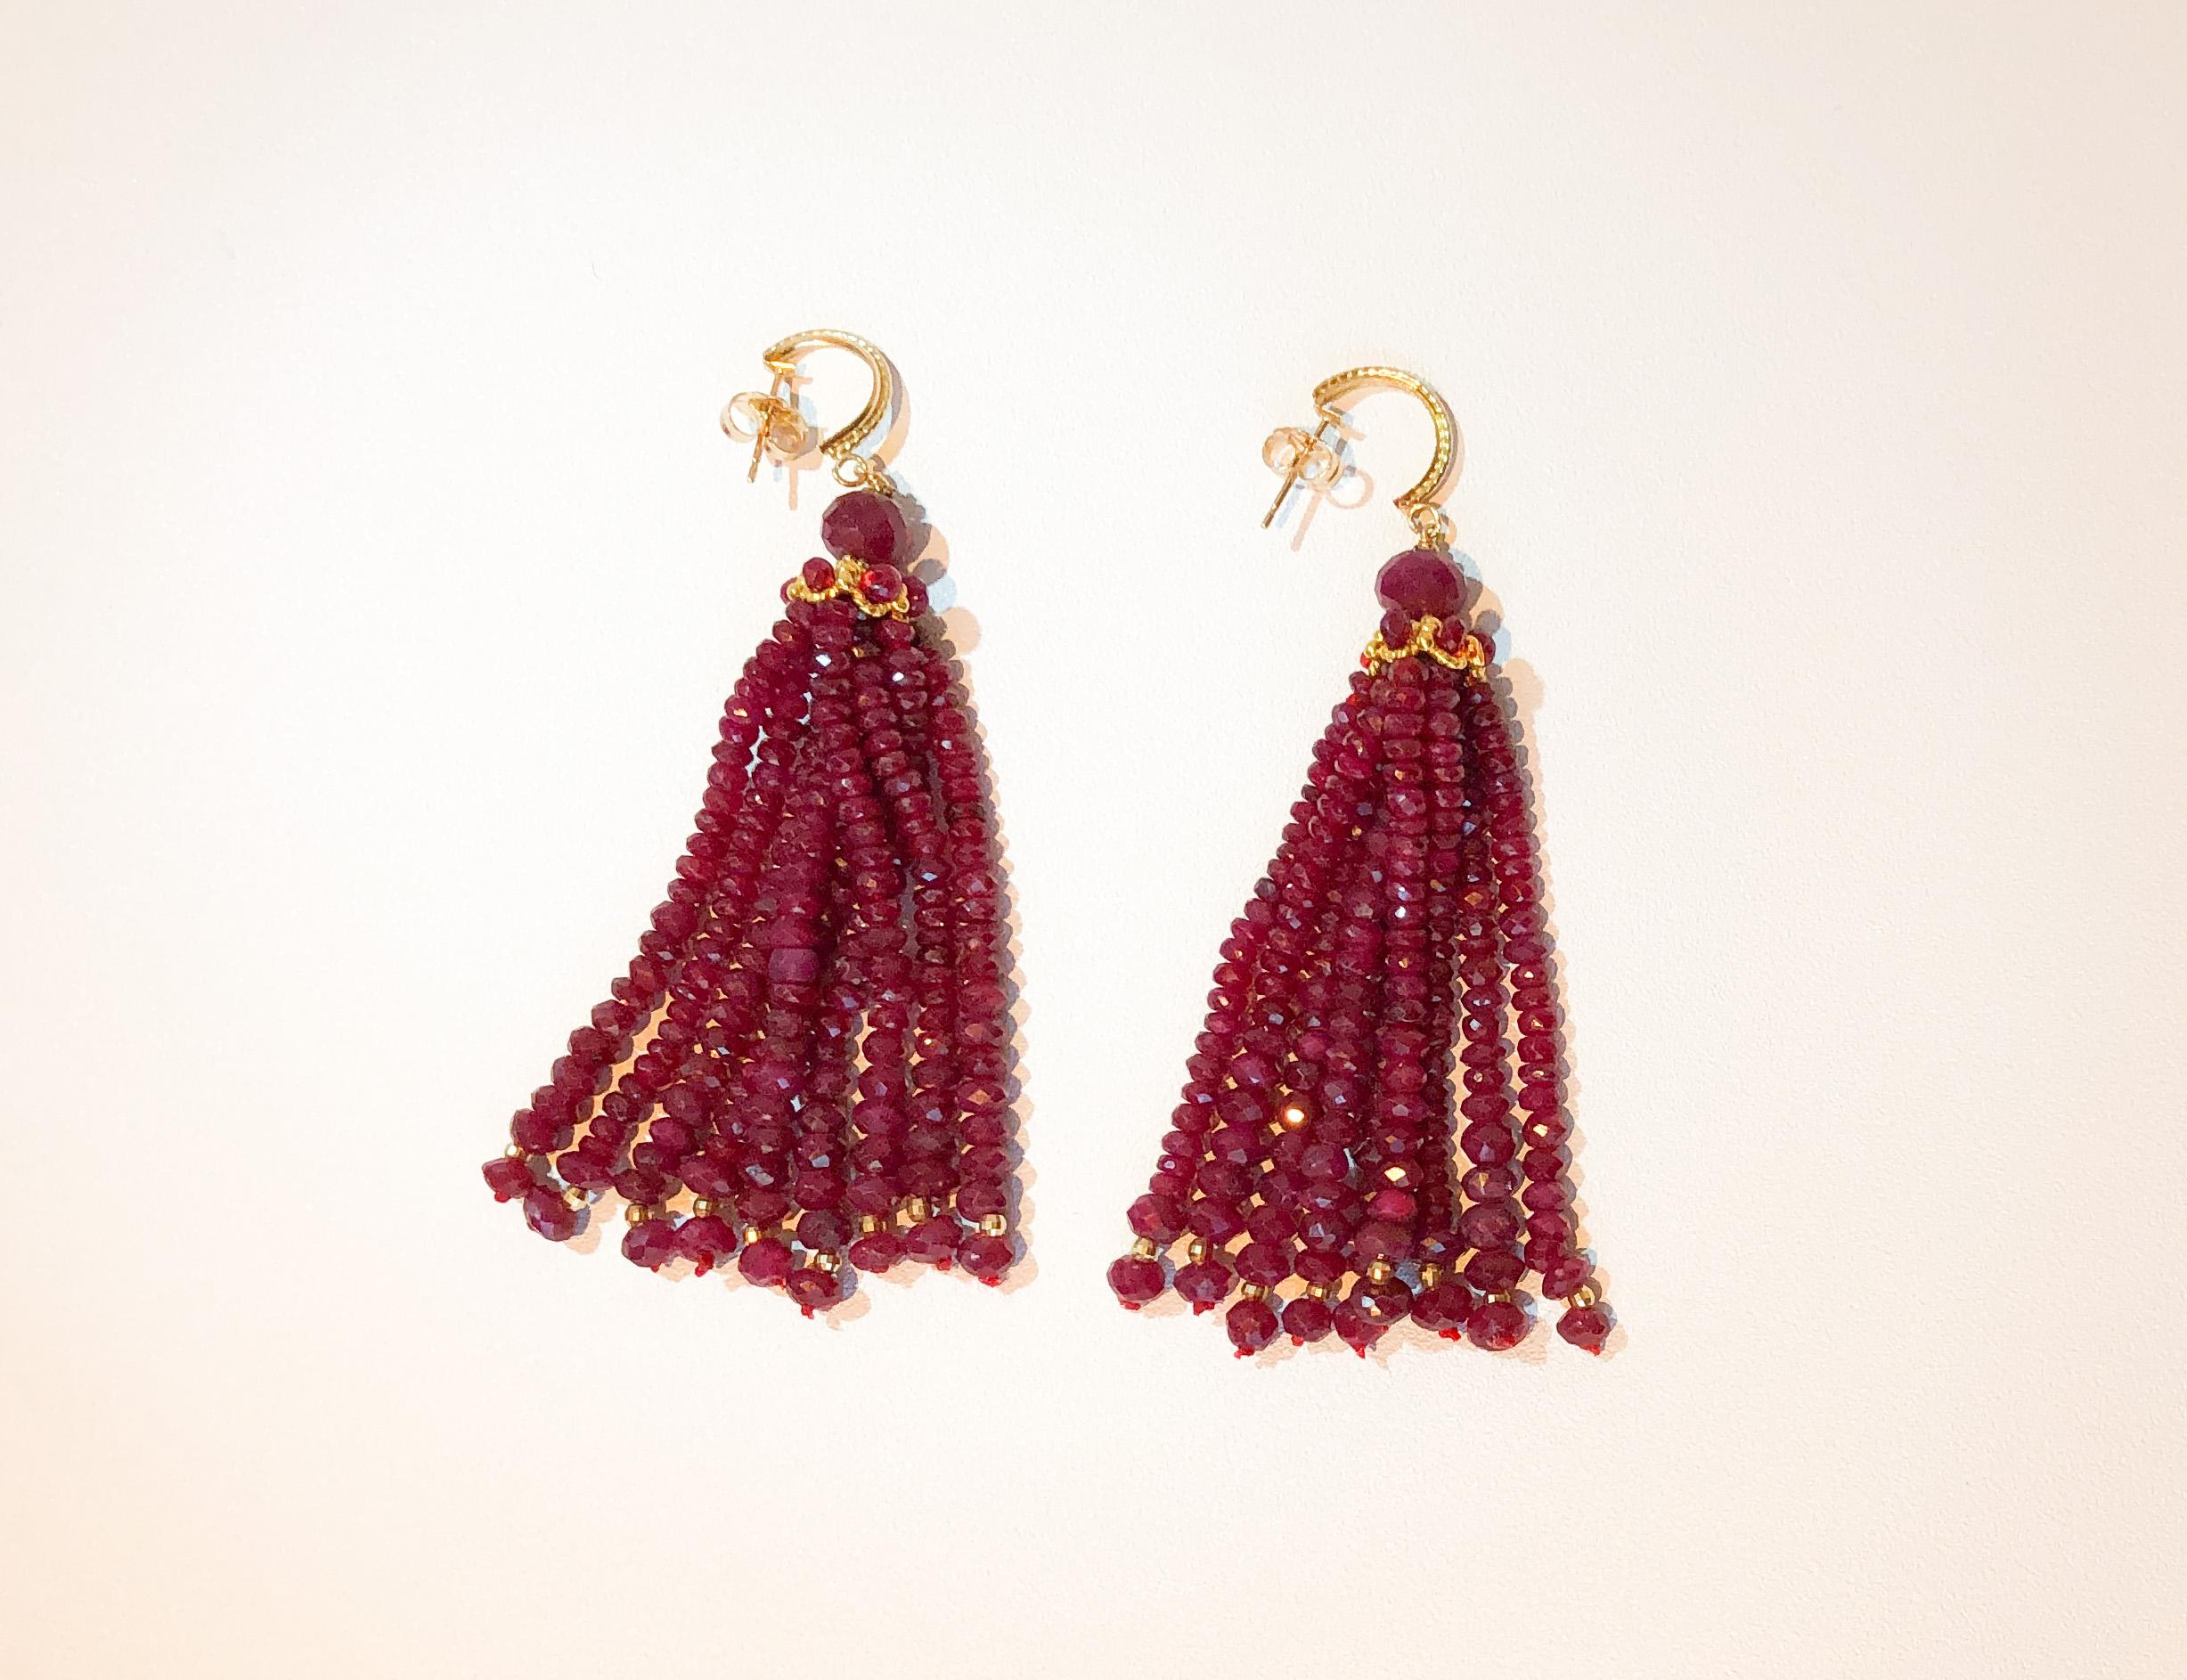 Marina J. Elegant Tassel Earrings with Sparkling Ruby Beads and 14k Yellow Gold  4